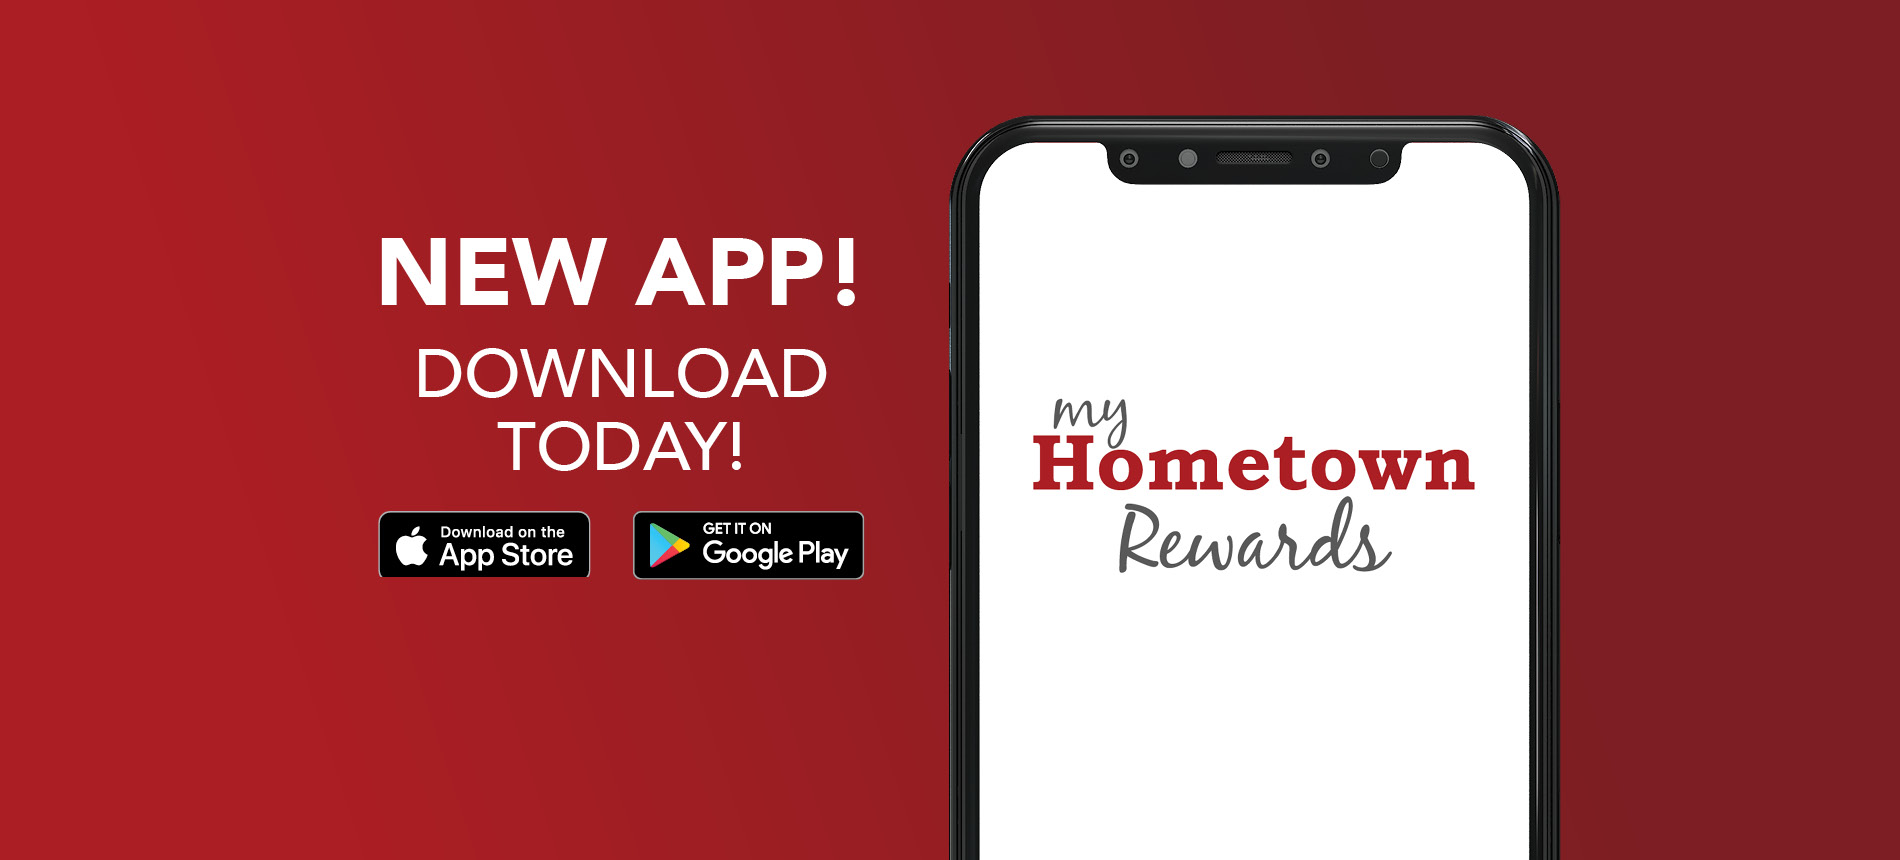 Download the app today!